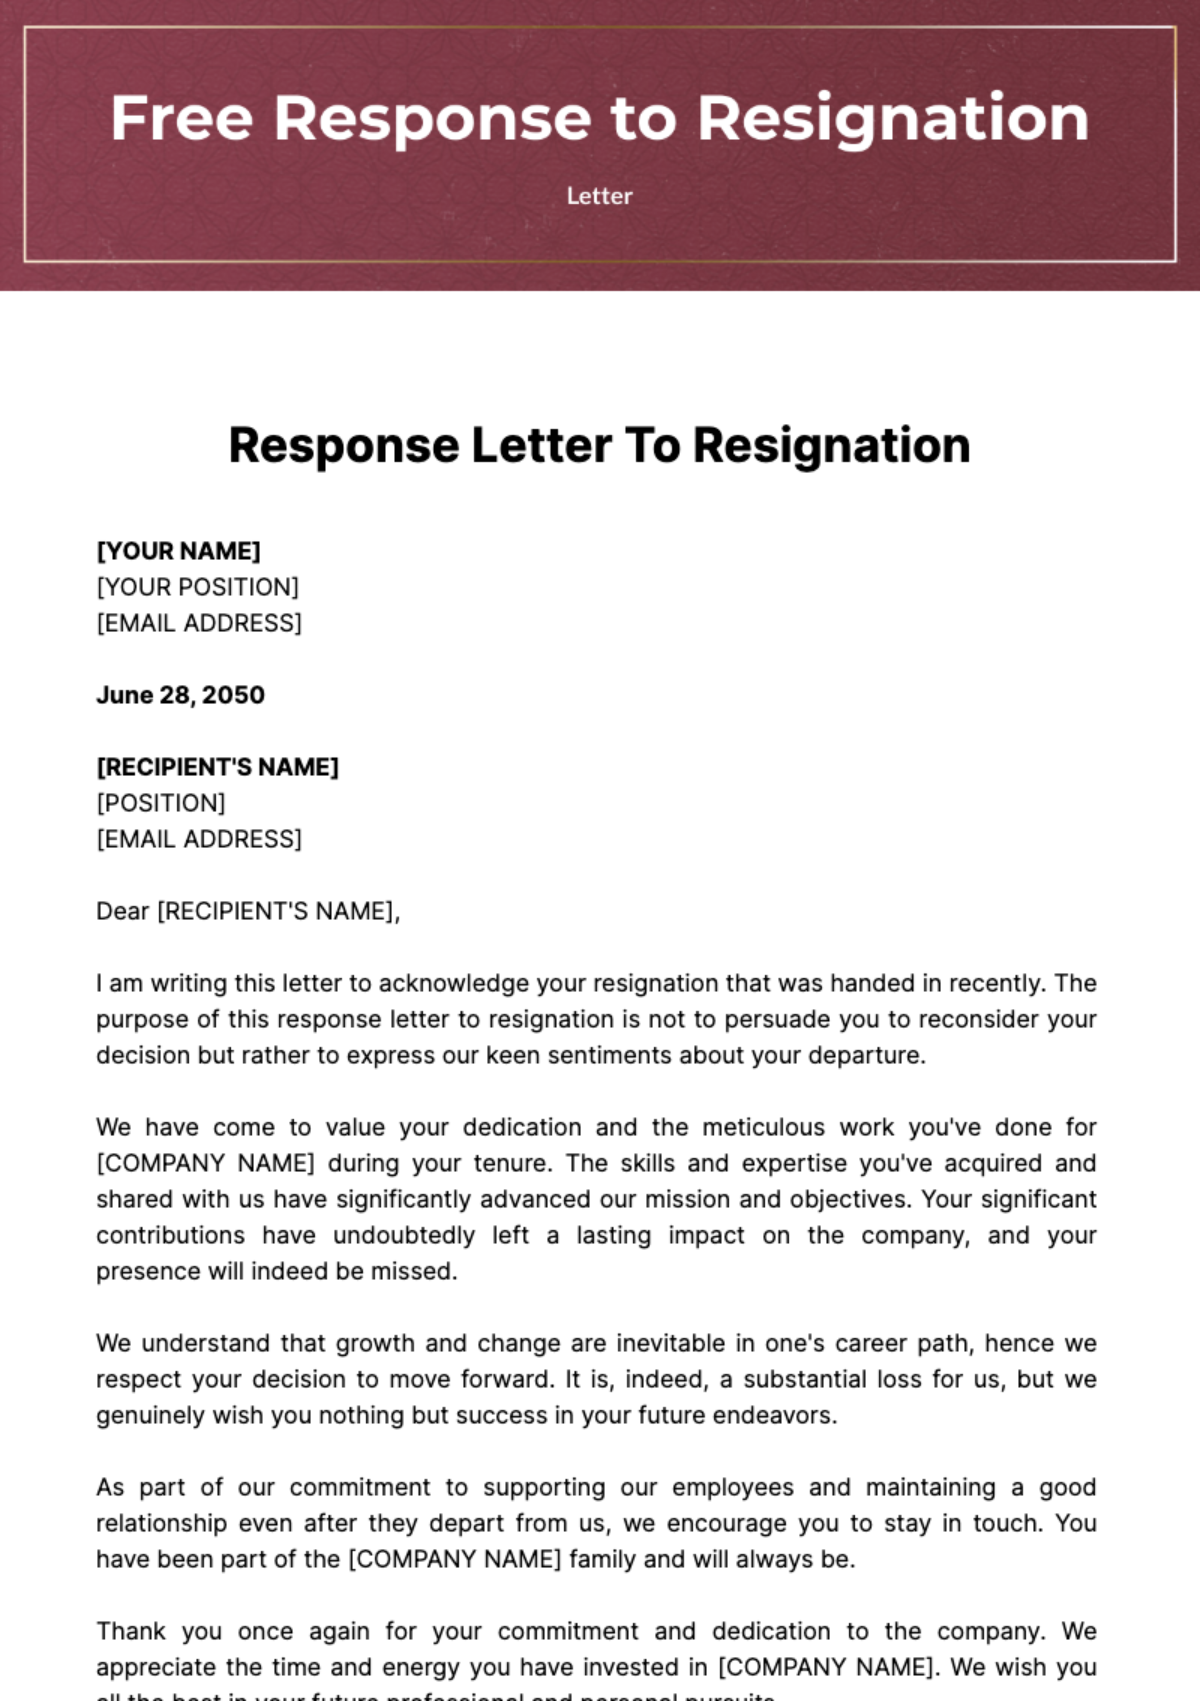 Free Response Letter to Resignation Template